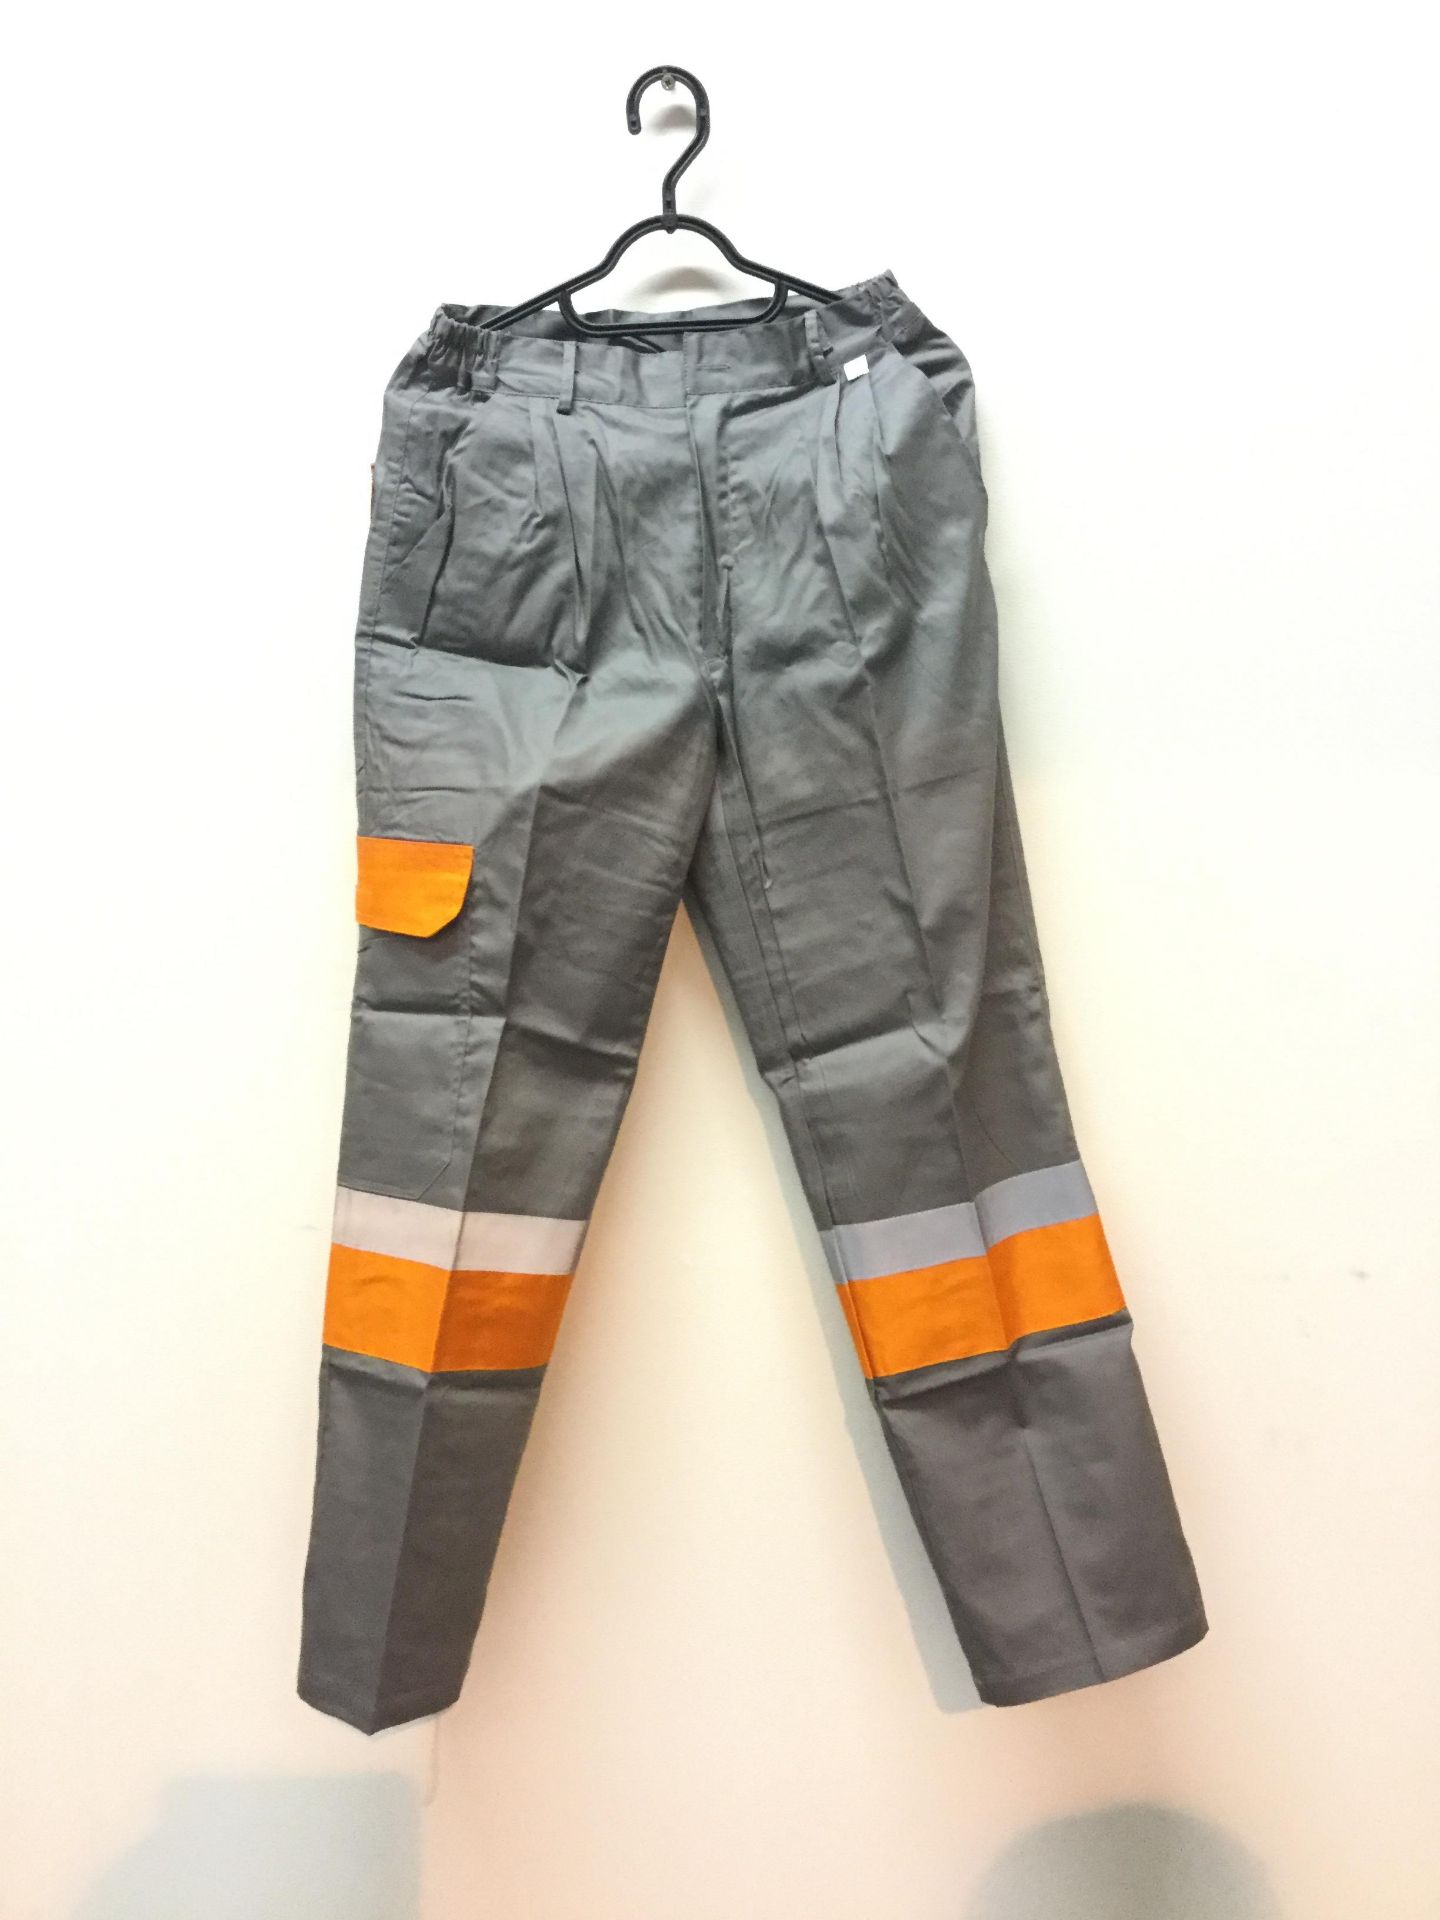 Flame Retardant Summer Trousers - Size 50